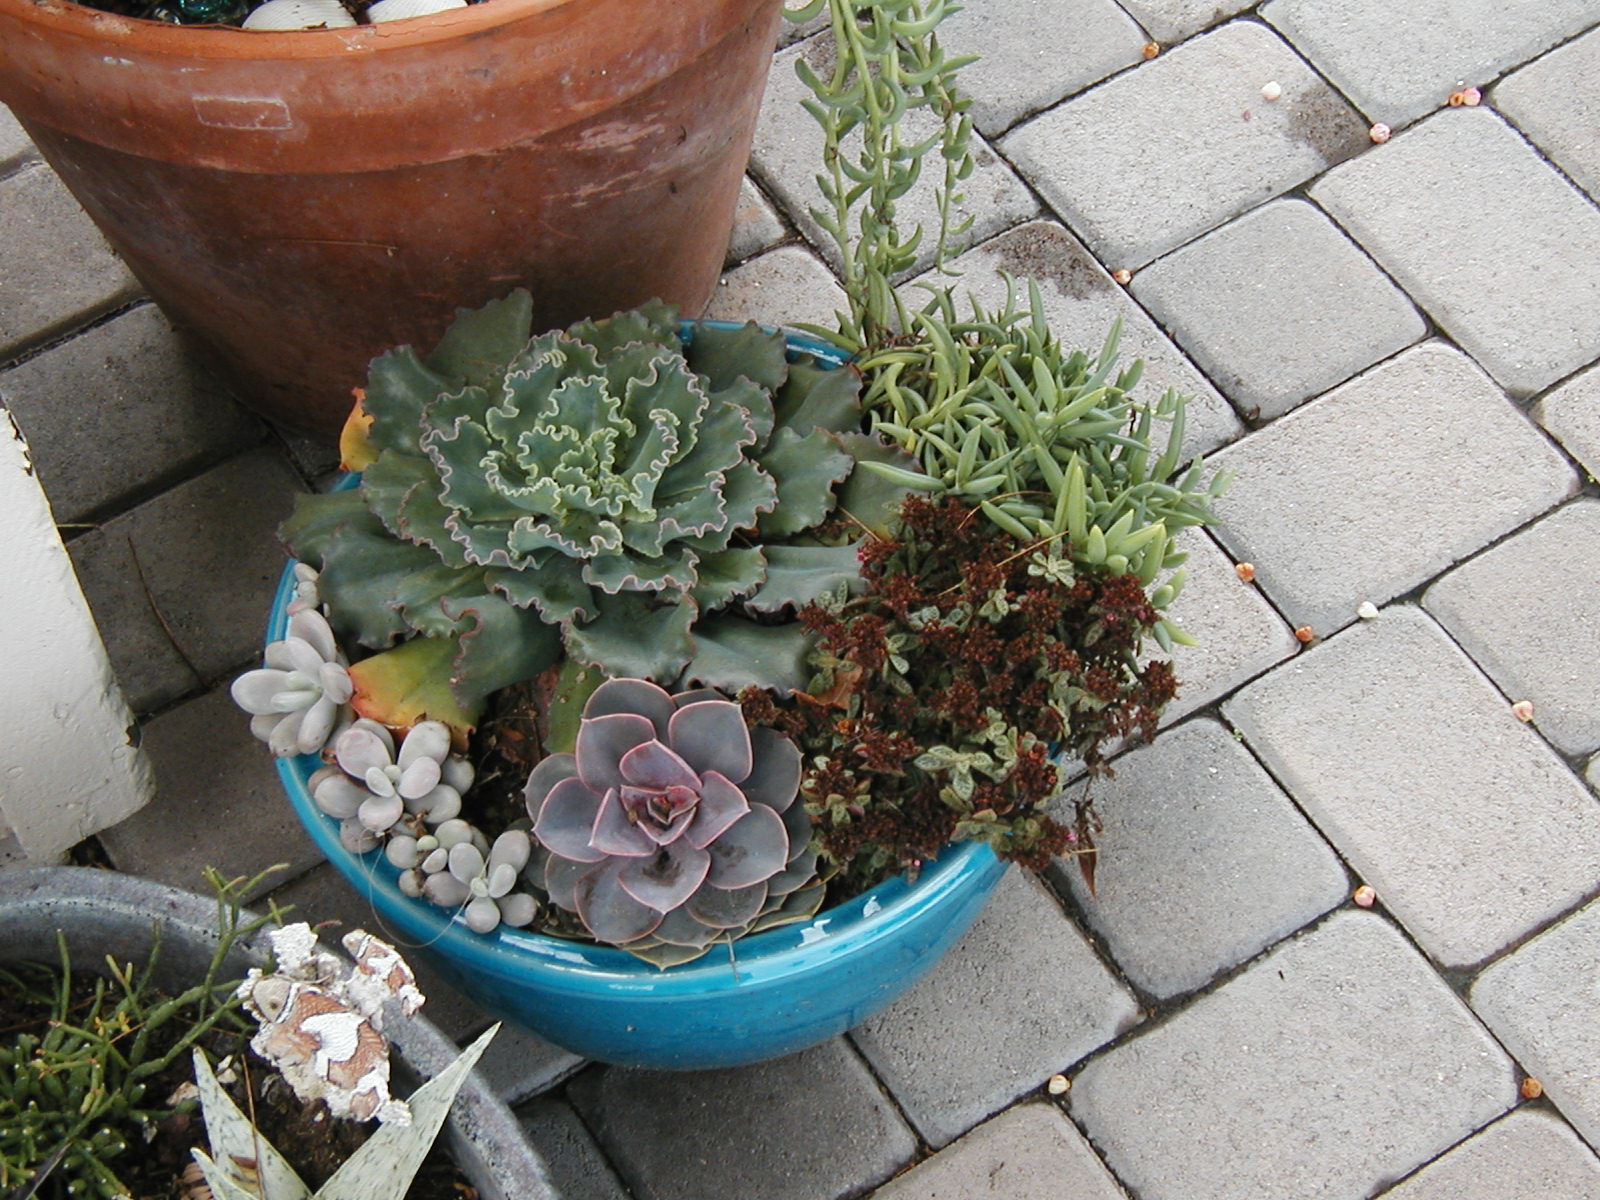 Late to the Garden Party: My Developing Relationship with Succulents